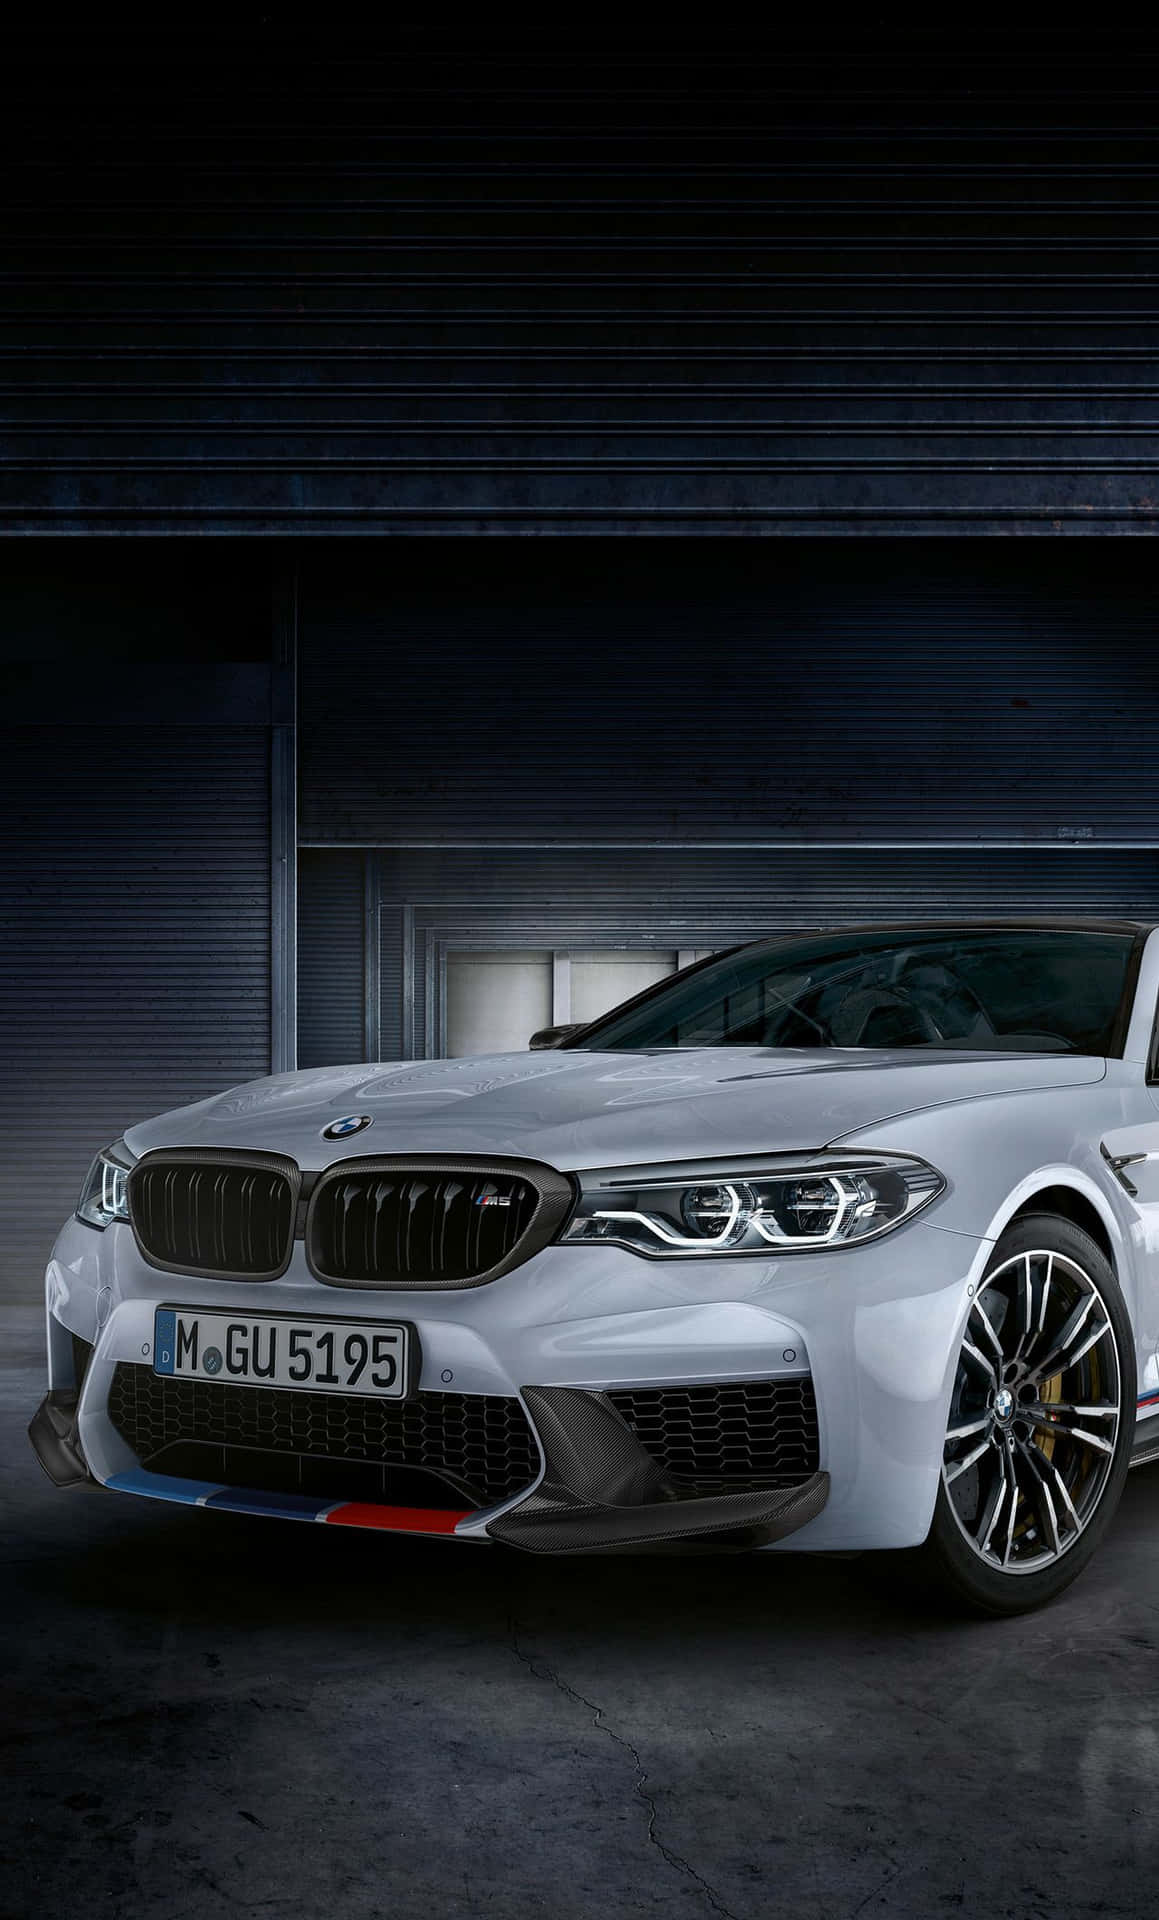 Stay connected in the driver's seat with your BMW and an iPhone Wallpaper